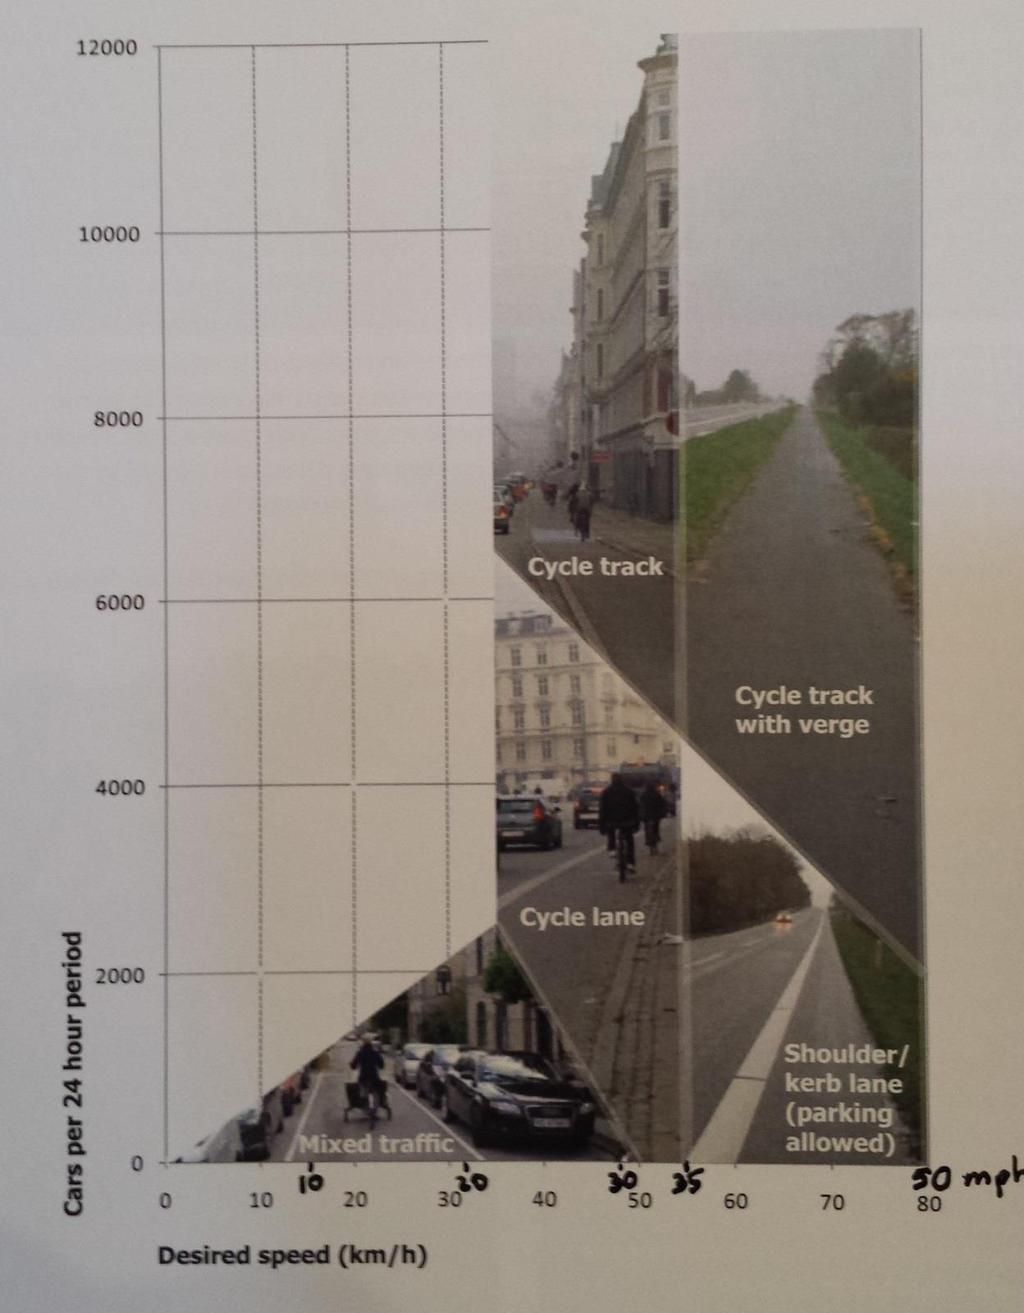 Bicycle infrastructure is ubiquitous Motor vehicle volume and speed determine bicycle facility type.